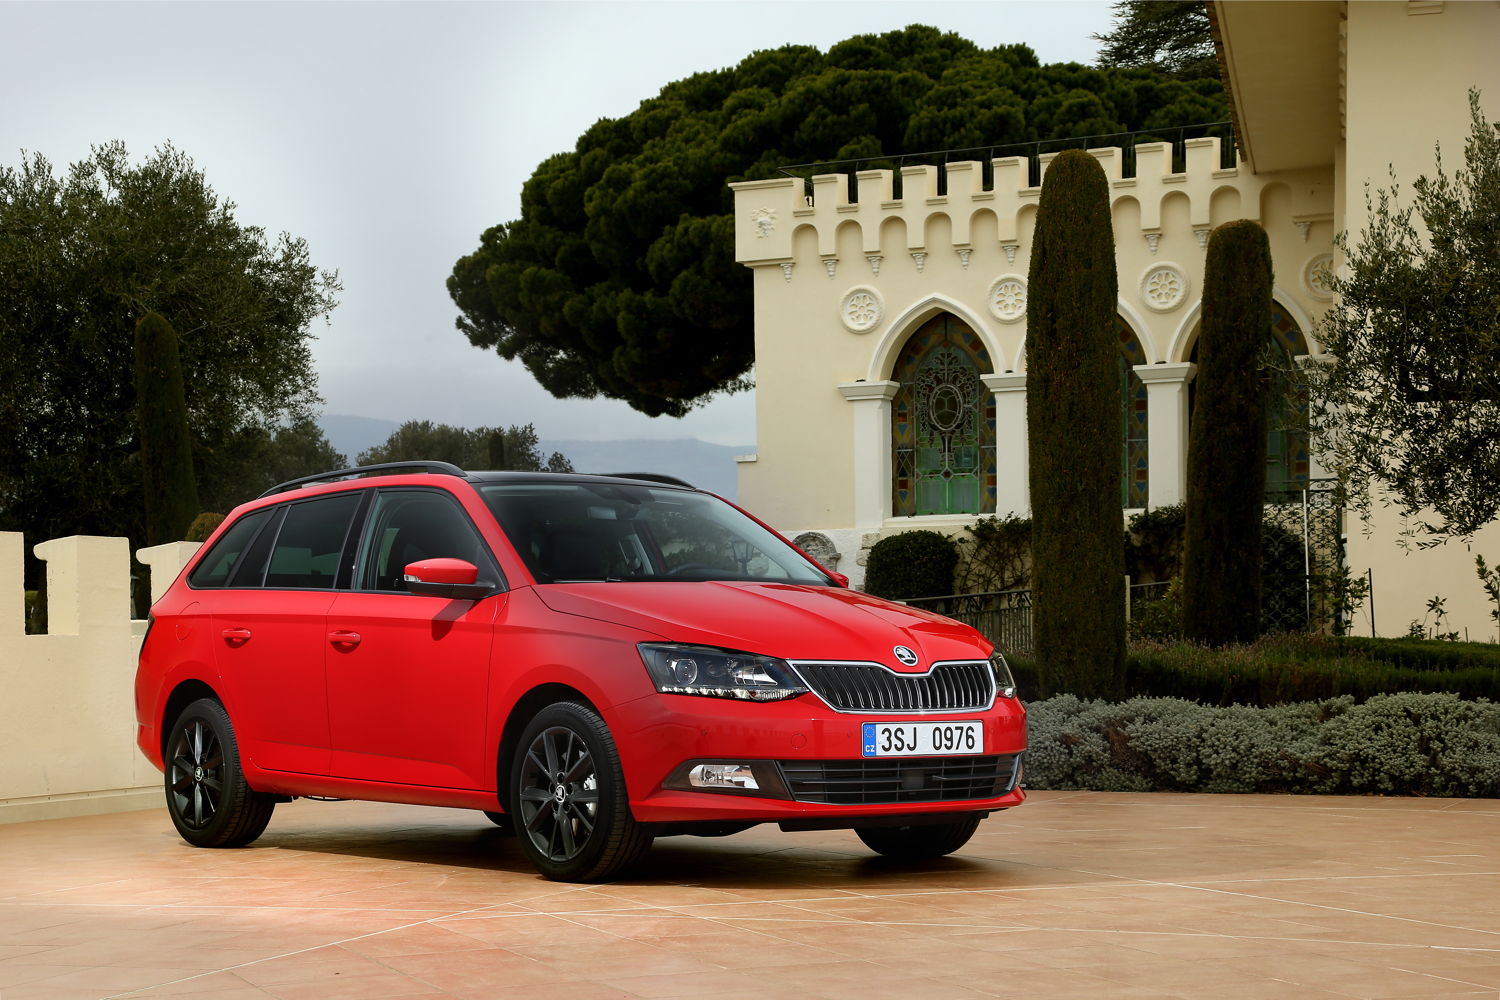 The ŠKODA FABIA made a significant contribution to the record month. Global deliveries of the small car rose 8.0% to 22,100 vehicles compared to the same period last year (March 2016: 20,500 vehicles). 